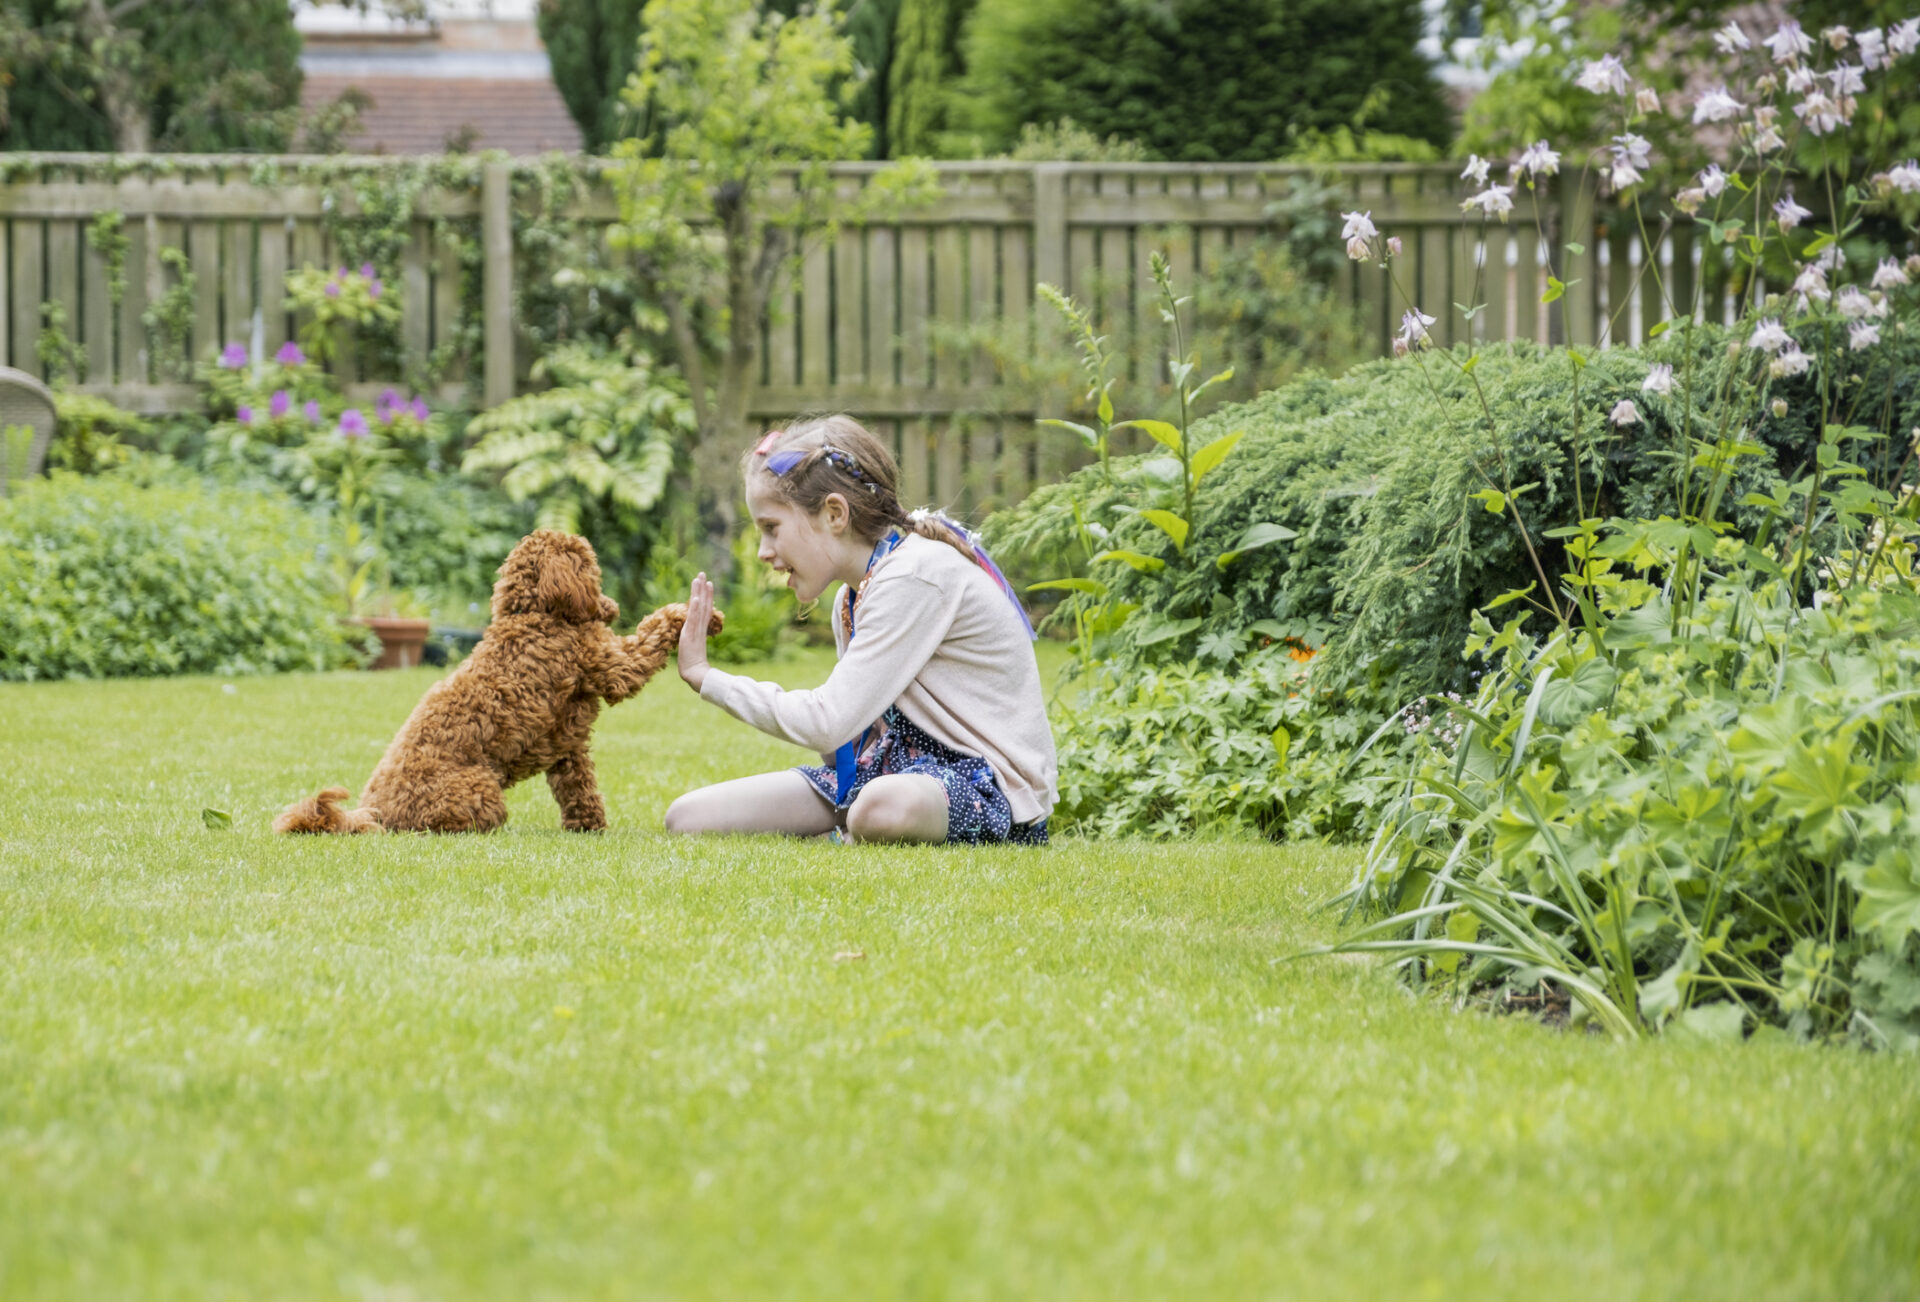 A child is seated on grass facing a brown dog, extending a hand for a high-five. They are in a lush garden surrounded by plants.